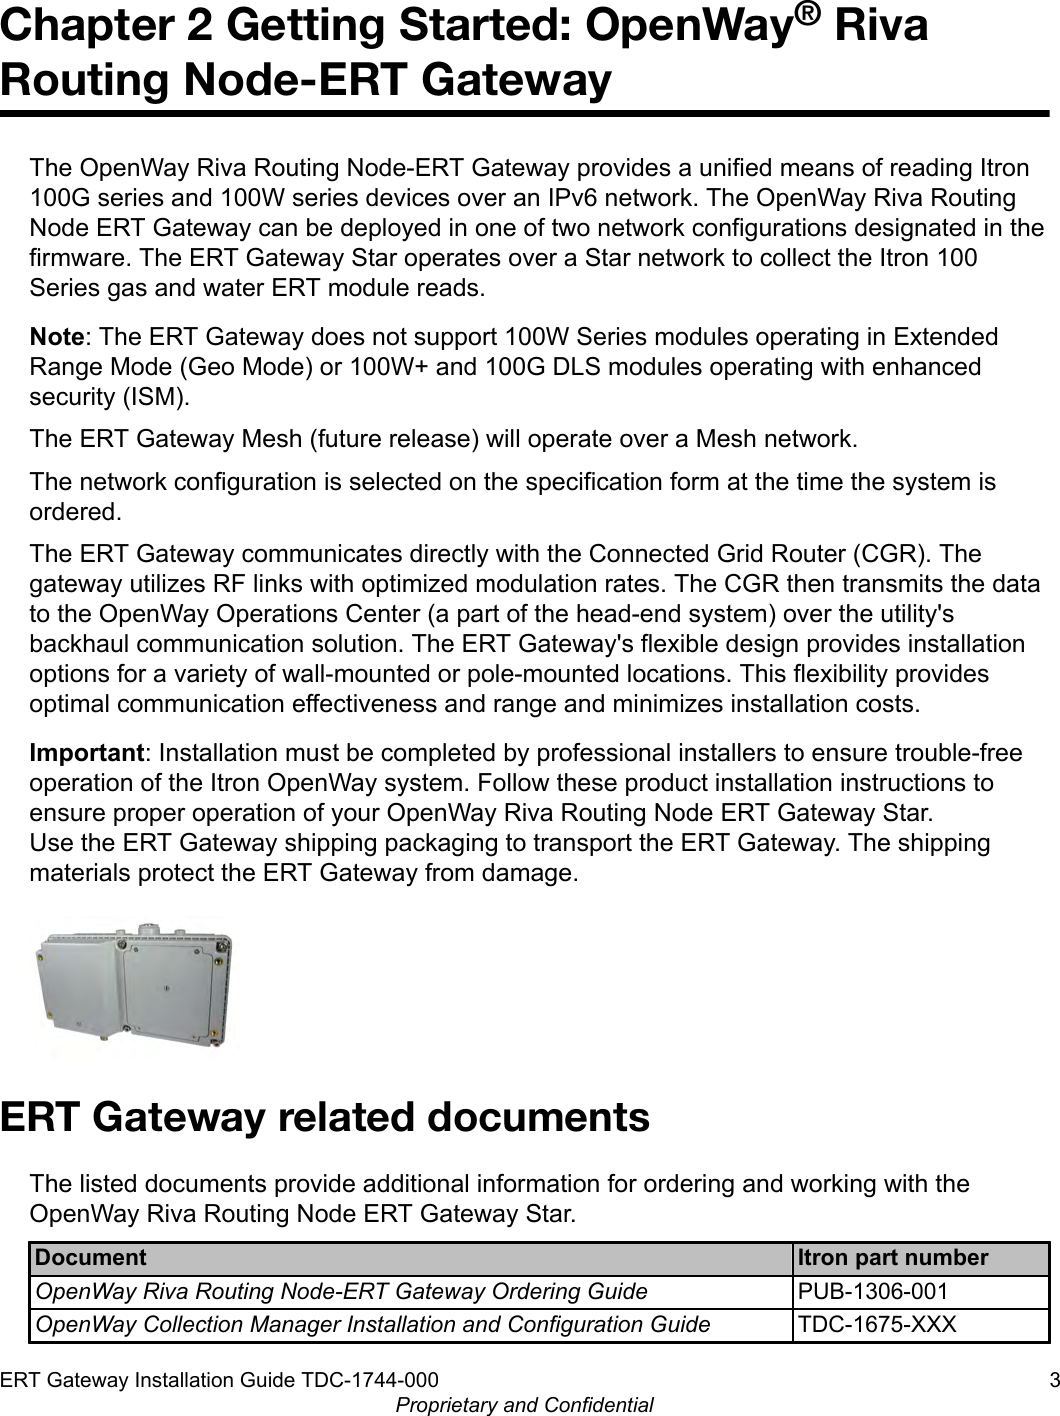 Chapter 2 Getting Started: OpenWay® RivaRouting Node-ERT GatewayThe OpenWay Riva Routing Node-ERT Gateway provides a unified means of reading Itron100G series and 100W series devices over an IPv6 network. The OpenWay Riva RoutingNode ERT Gateway can be deployed in one of two network configurations designated in thefirmware. The ERT Gateway Star operates over a Star network to collect the Itron 100Series gas and water ERT module reads.Note: The ERT Gateway does not support 100W Series modules operating in ExtendedRange Mode (Geo Mode) or 100W+ and 100G DLS modules operating with enhancedsecurity (ISM).The ERT Gateway Mesh (future release) will operate over a Mesh network.The network configuration is selected on the specification form at the time the system isordered.The ERT Gateway communicates directly with the Connected Grid Router (CGR). Thegateway utilizes RF links with optimized modulation rates. The CGR then transmits the datato the OpenWay Operations Center (a part of the head-end system) over the utility&apos;sbackhaul communication solution. The ERT Gateway&apos;s flexible design provides installationoptions for a variety of wall-mounted or pole-mounted locations. This flexibility providesoptimal communication effectiveness and range and minimizes installation costs.Important: Installation must be completed by professional installers to ensure trouble-freeoperation of the Itron OpenWay system. Follow these product installation instructions toensure proper operation of your OpenWay Riva Routing Node ERT Gateway Star.Use the ERT Gateway shipping packaging to transport the ERT Gateway. The shippingmaterials protect the ERT Gateway from damage.ERT Gateway related documentsThe listed documents provide additional information for ordering and working with theOpenWay Riva Routing Node ERT Gateway Star.Document Itron part numberOpenWay Riva Routing Node-ERT Gateway Ordering Guide PUB-1306-001OpenWay Collection Manager Installation and Configuration Guide TDC-1675-XXXERT Gateway Installation Guide TDC-1744-000 3Proprietary and Confidential